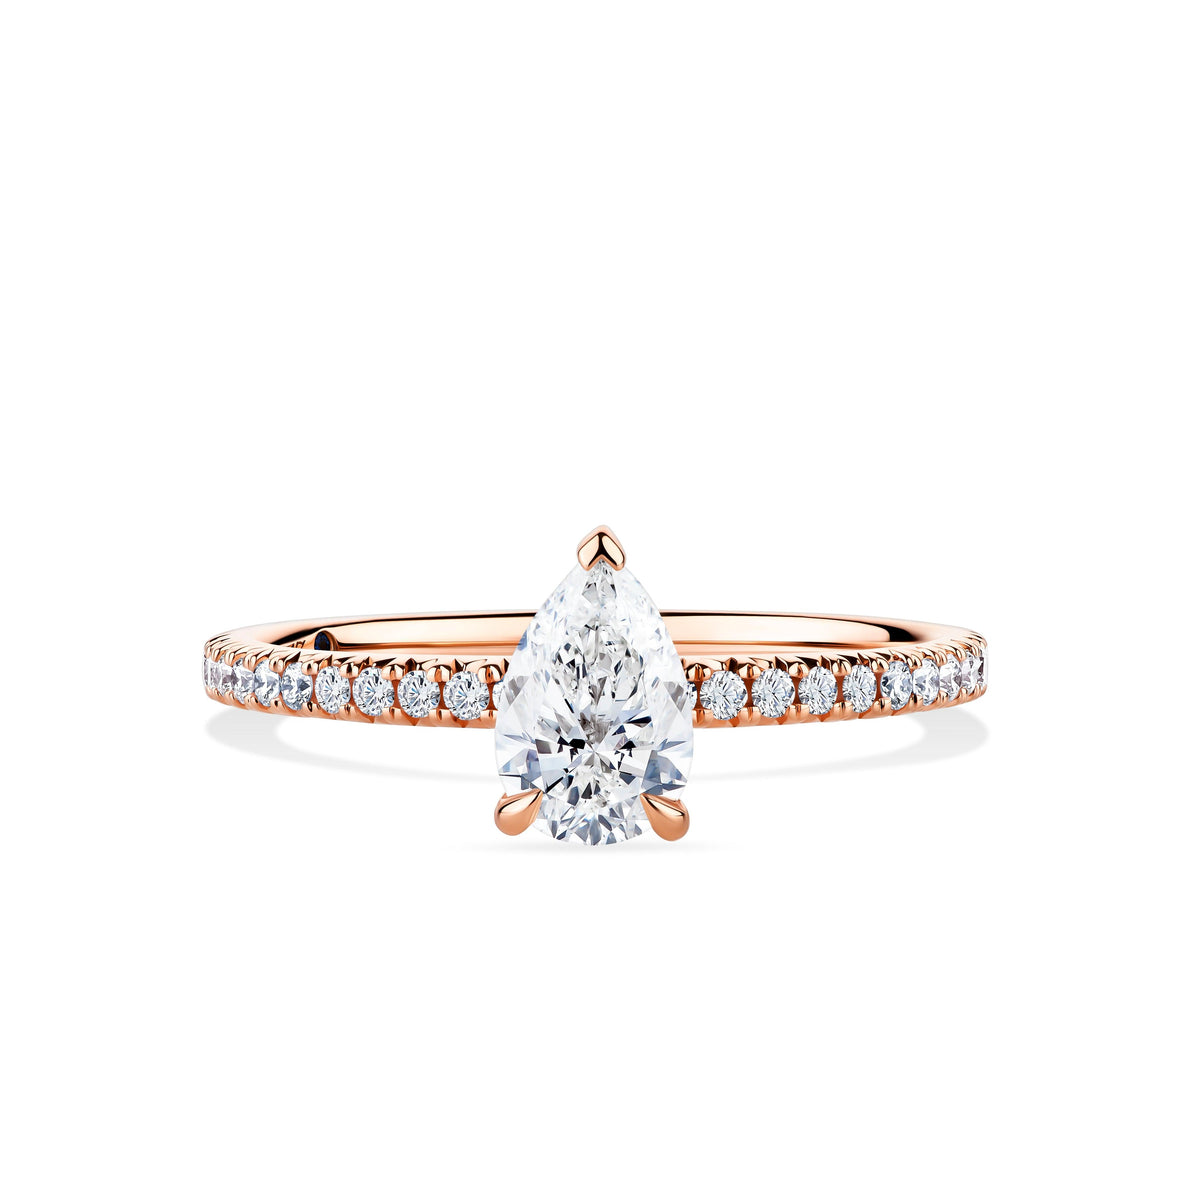 1917™ 0.96ct TW Diamond Pear Solitaire Engagement Ring in 18ct Rose Gold - Wallace Bishop